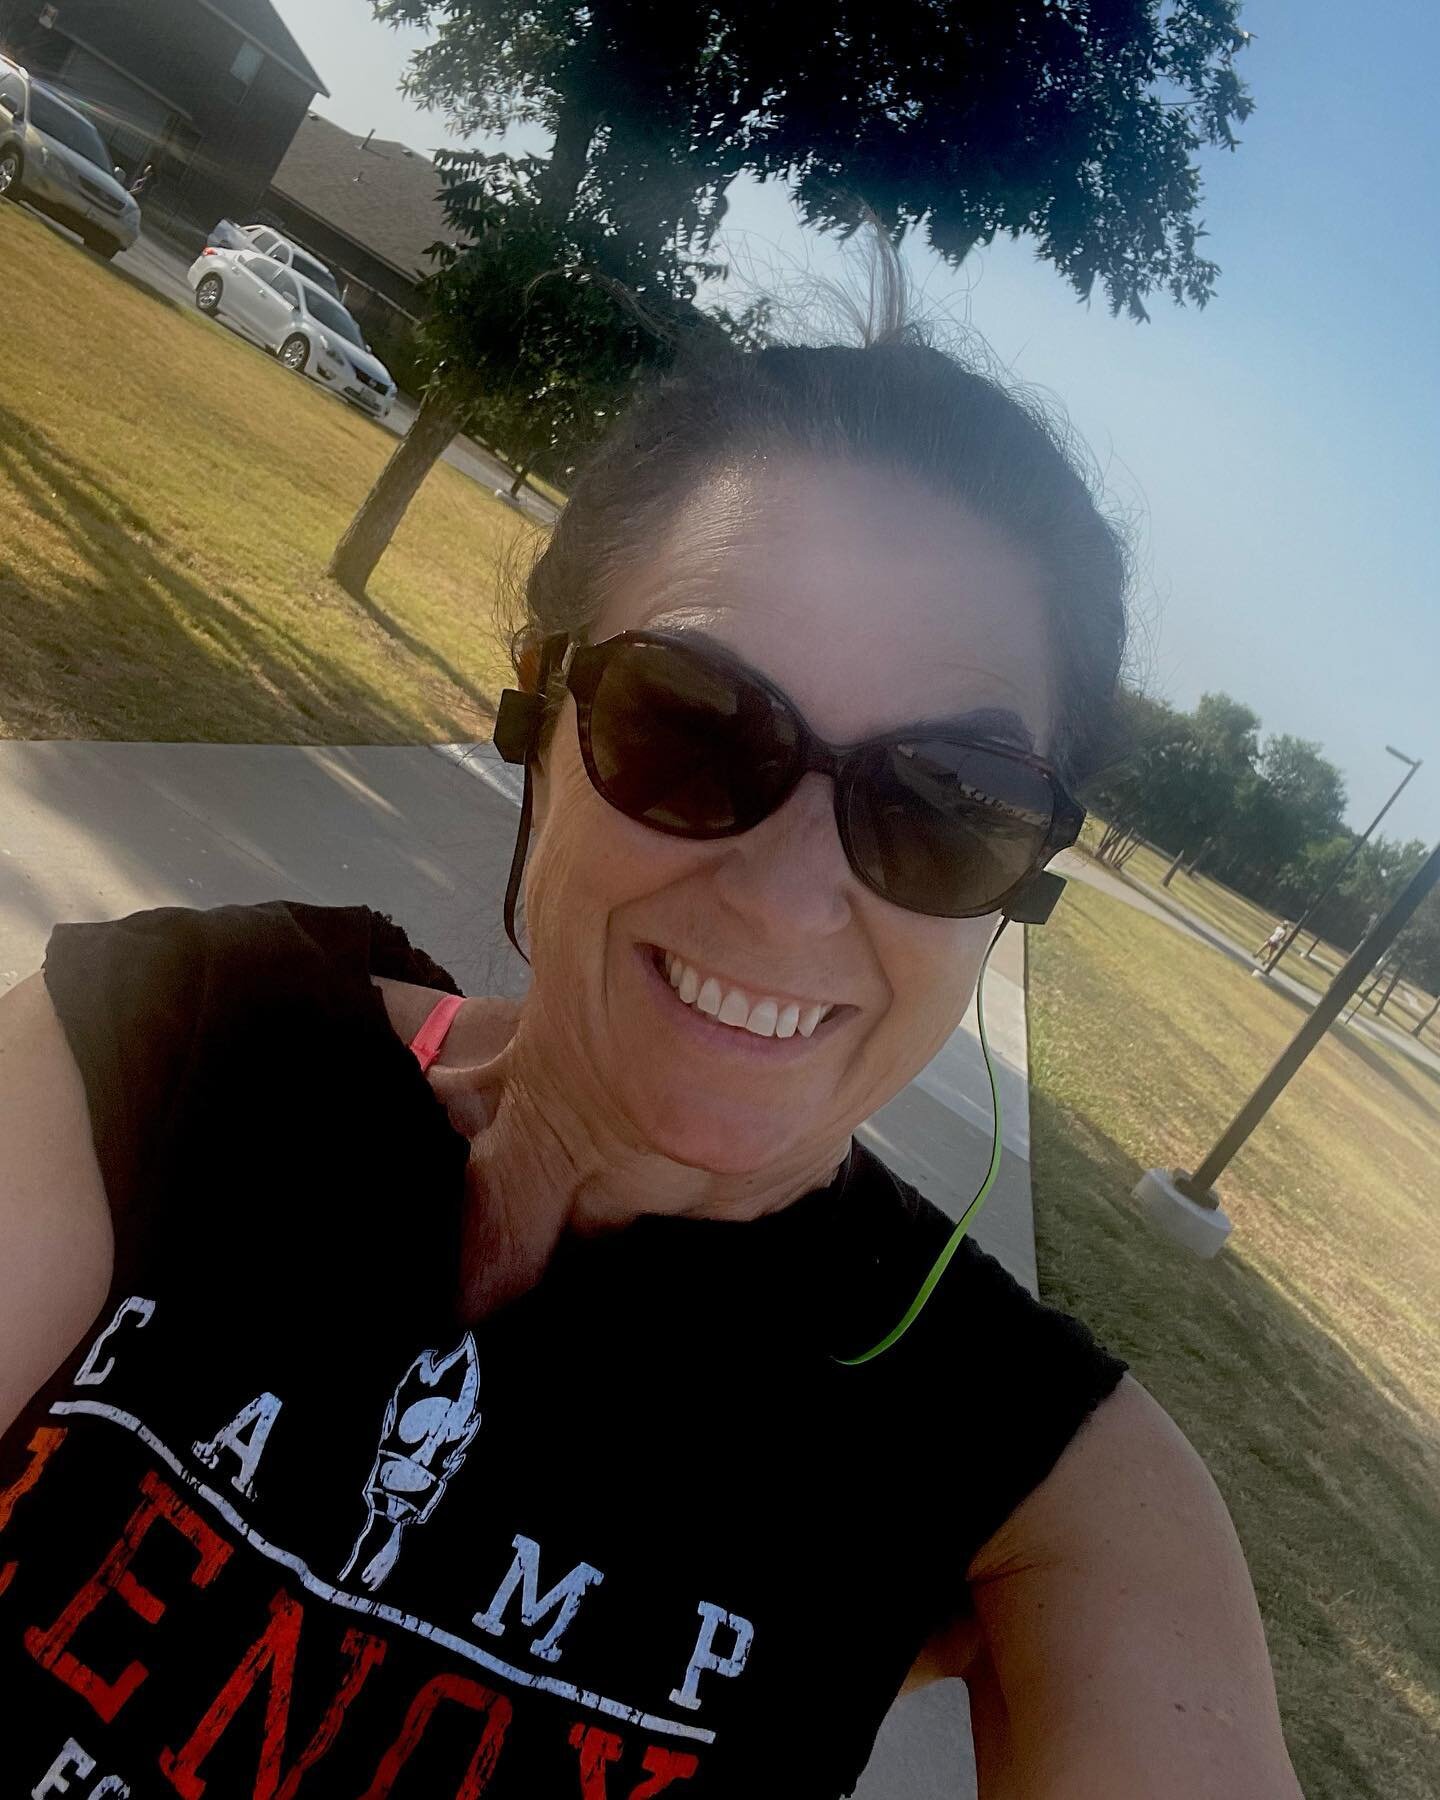 It&rsquo;s been super hot and sometimes it takes great motivation to get outside. This morning I pumped out 2 miles before I couldn&rsquo;t keep the sweat out of my eyes 😪 
&bull;
&bull;
&bull;
#texassummer #moveyourbody #lungdisease  #chronicillnes